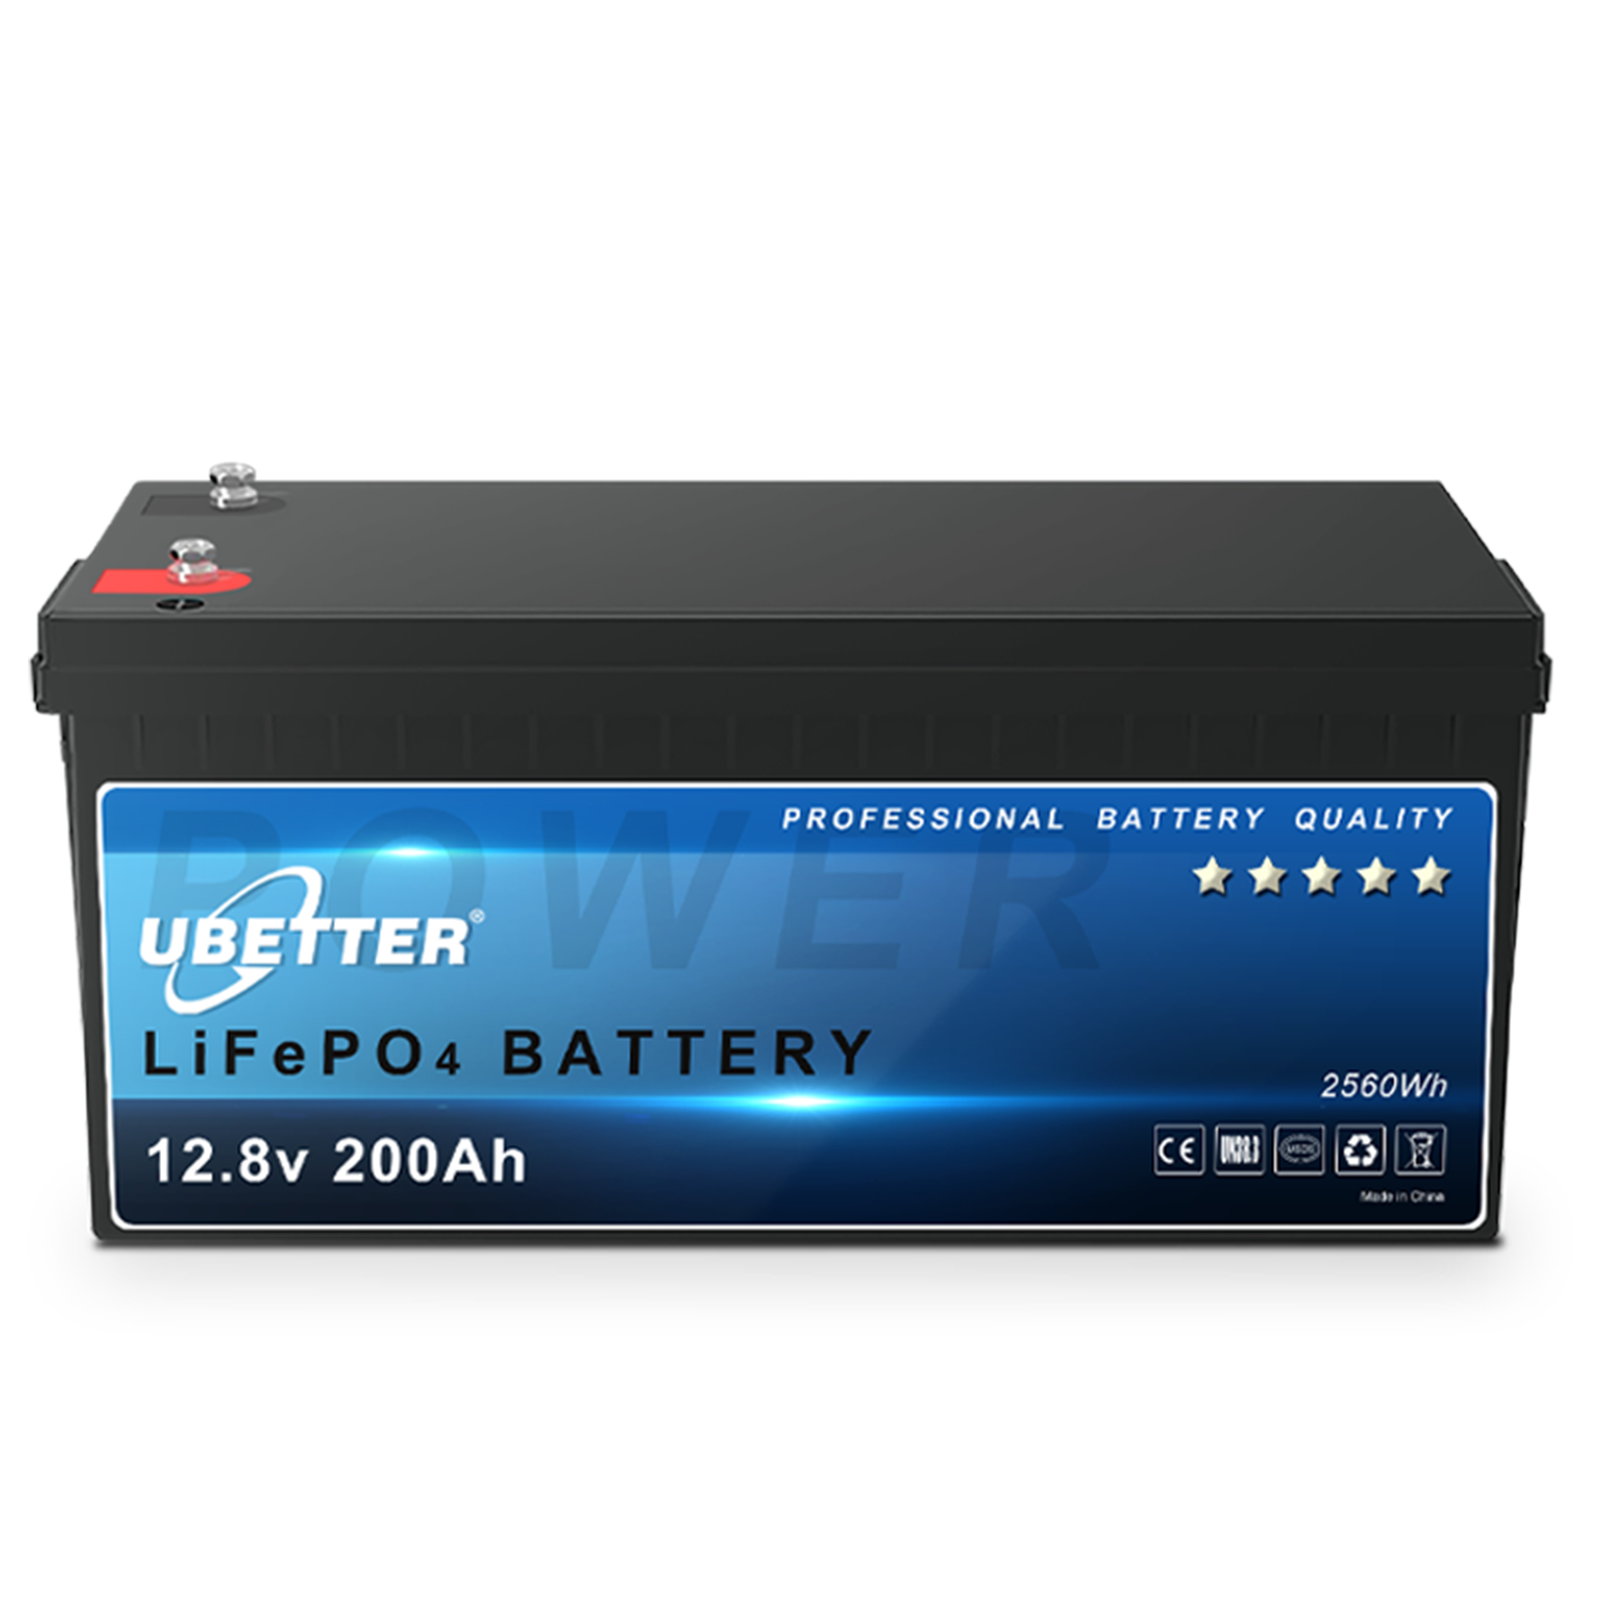 

[EU Direct] Ubetter 12V 200Ah LiFePO4 Battery Lithium Battery 2560Wh Rechargeable with BMS Over 4000 Times Deep CycleS